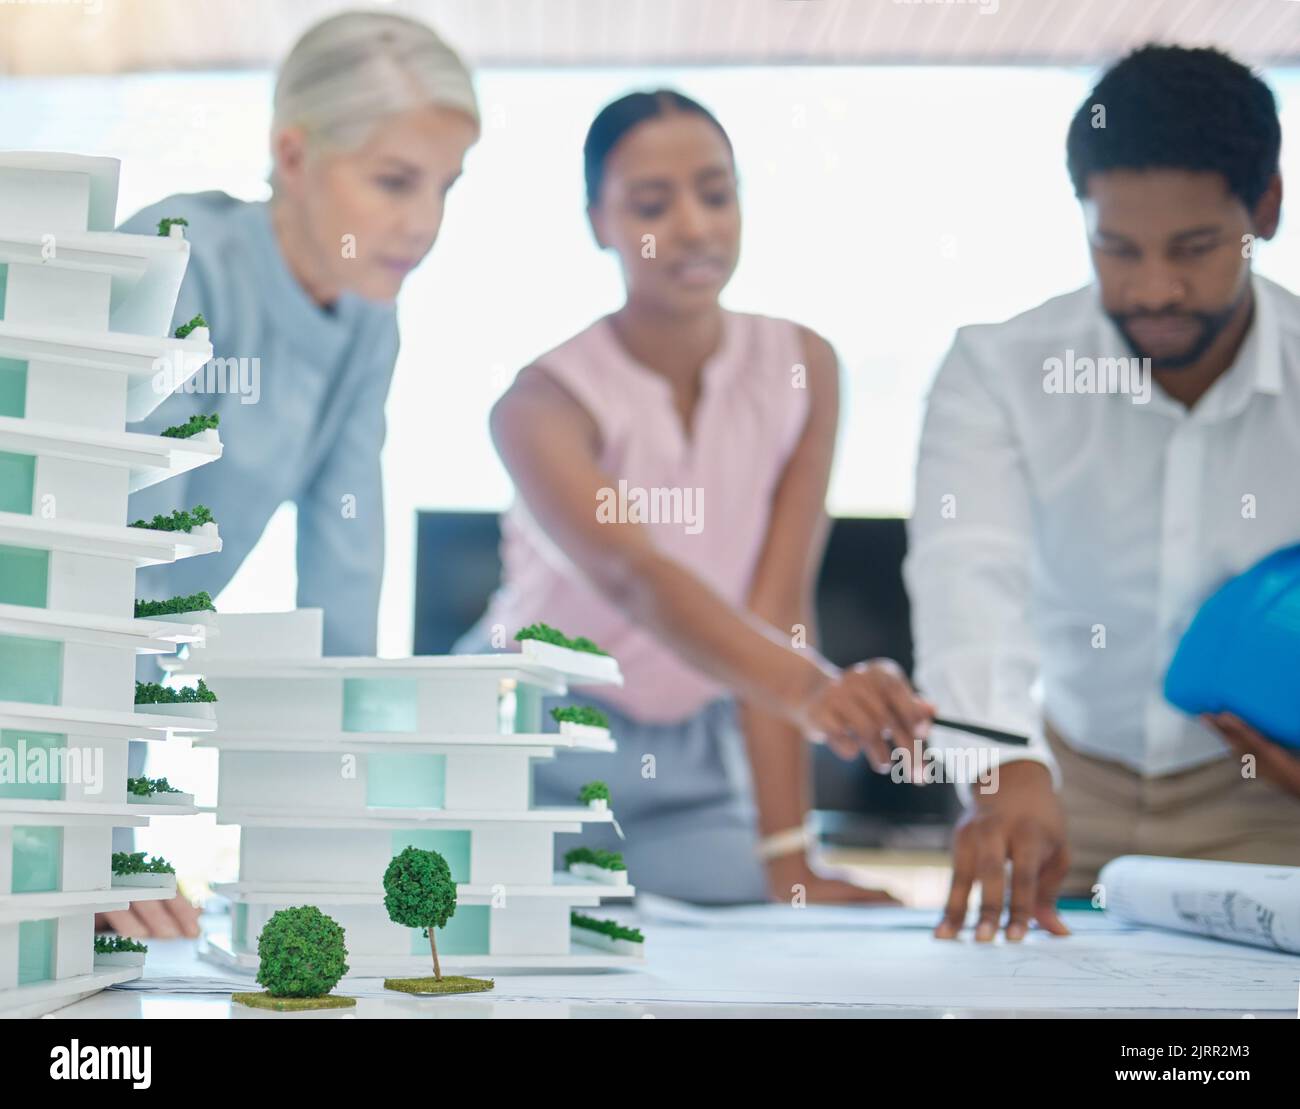 Architect or engineer team planning and designing a building in a meeting in the office or boardroom. City development planner or architecture group Stock Photo